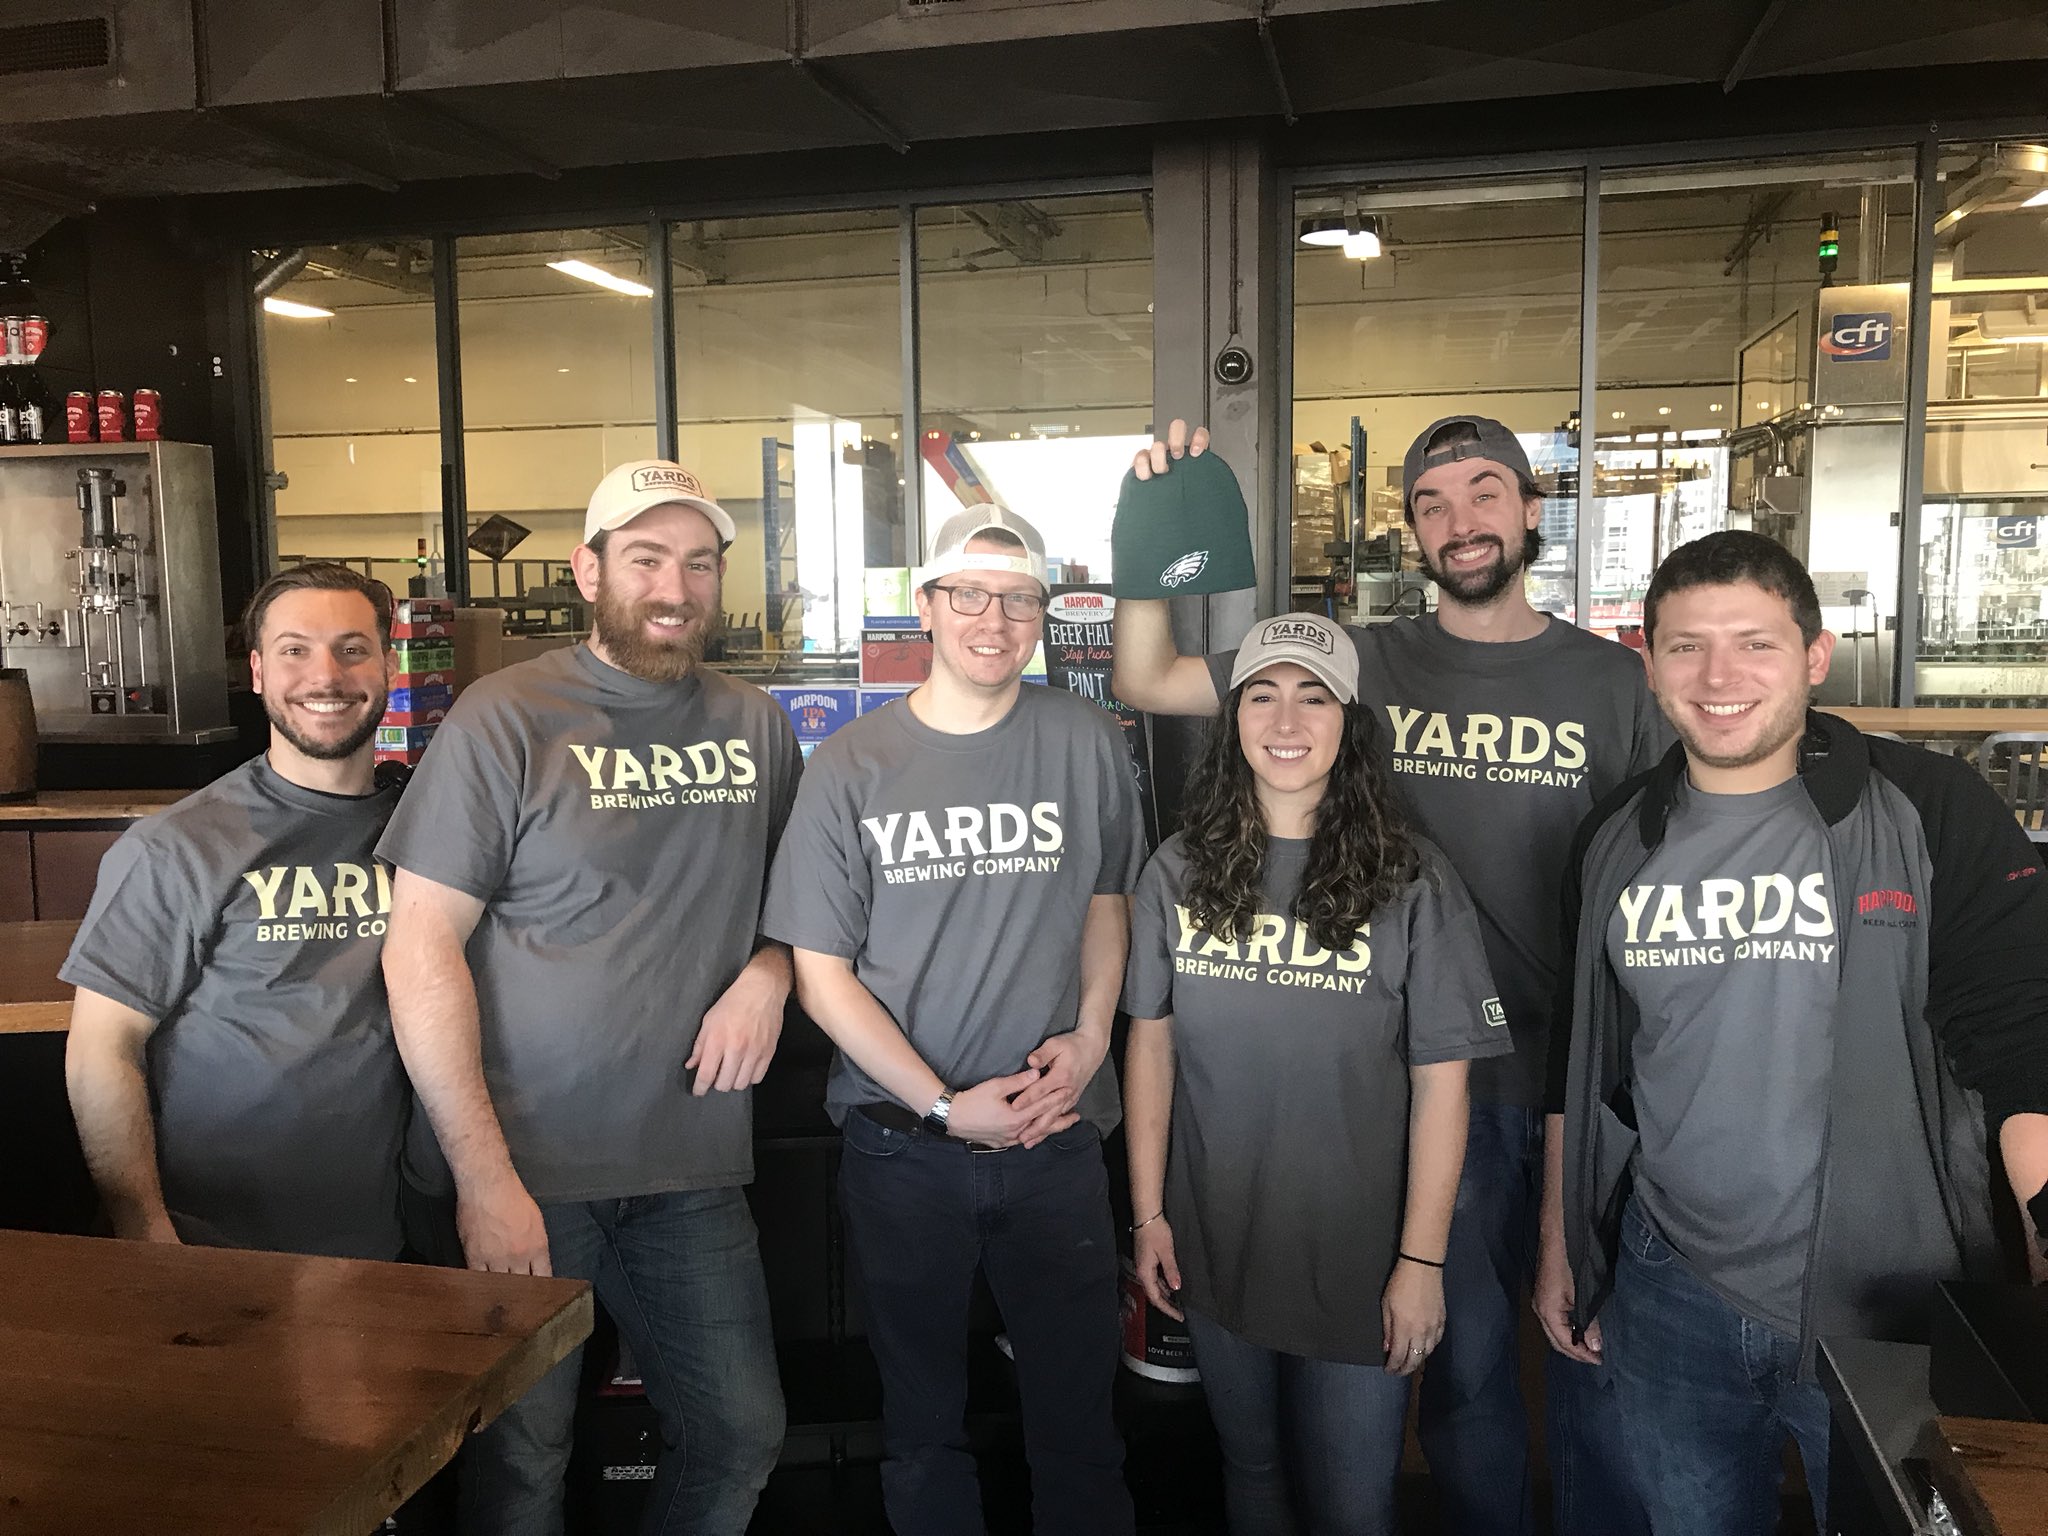 Harpoon Brewery on X: We think they're probably just happy for their free  shirts @yardsbrew. Come on down to our Boston brewery to point and laugh or  drown your sorrows #biggamebet #newenglandstillrules